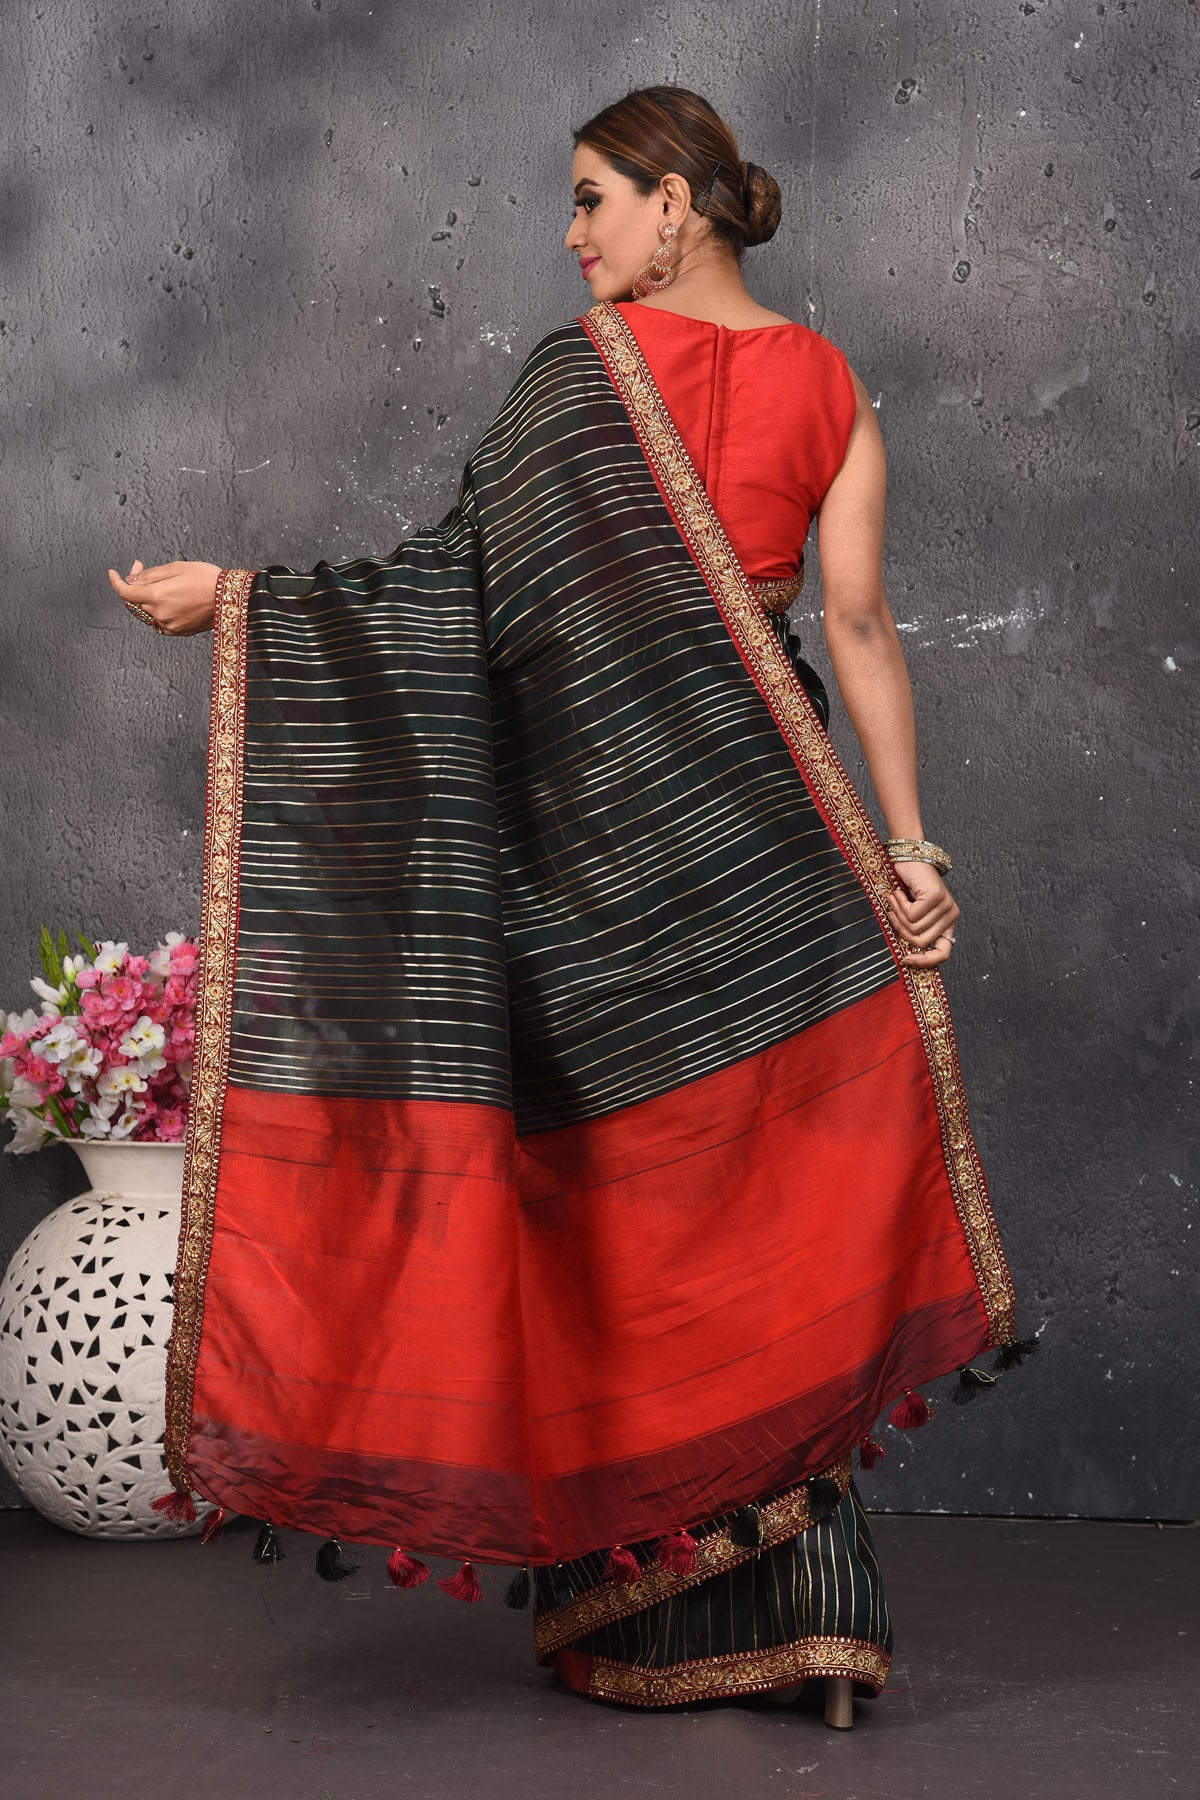 Buy this elegant black saree leheriya with gota patti work online in USA. Style this designer sari which has a beautiful red border with golden lace at the edge with a potli bag and high heels. Add designer gota patti sari to your collection from Pure Elegance Indian saree store in USA.- Back view with open pallu.